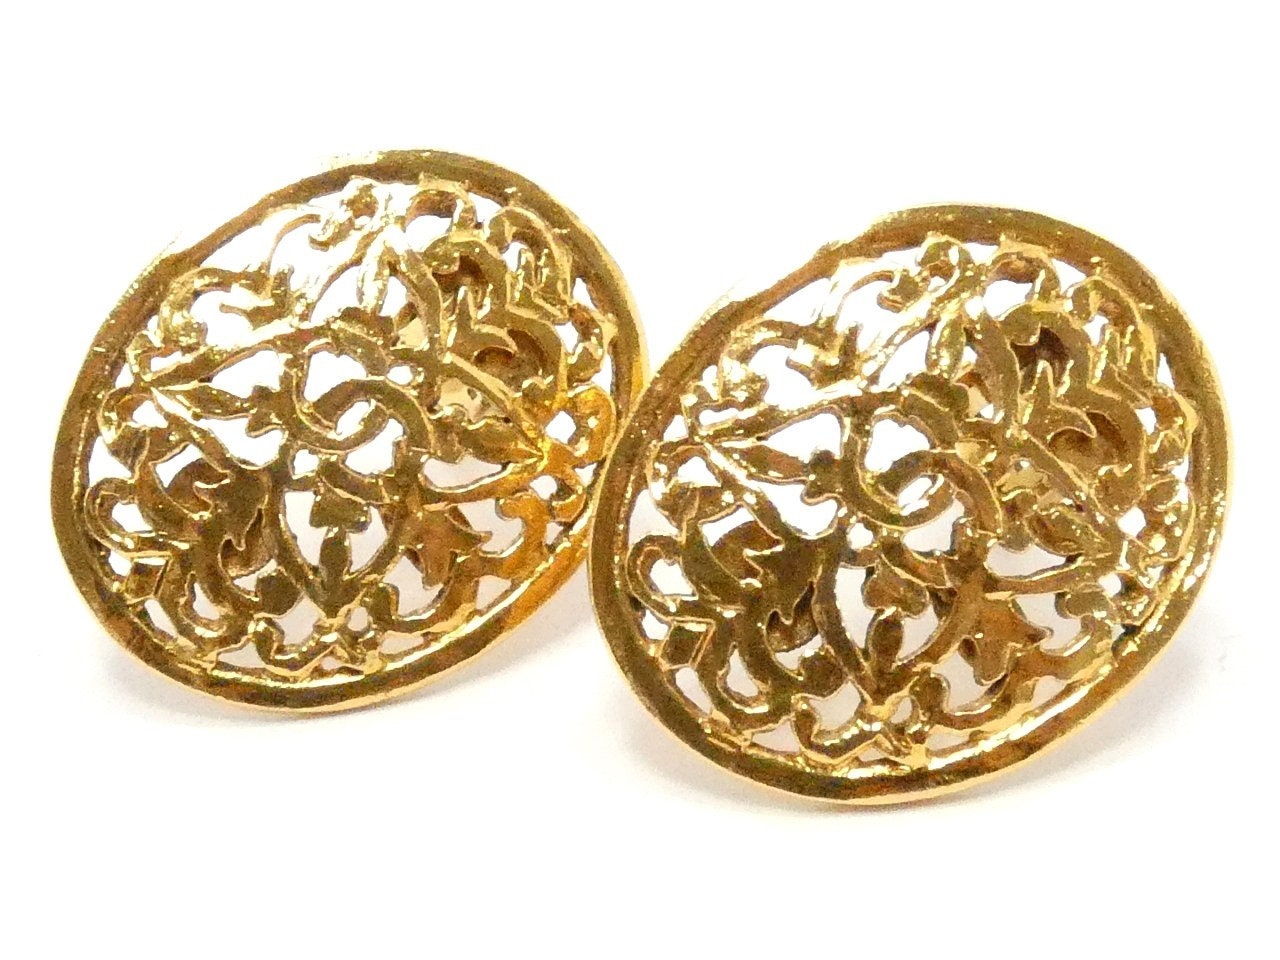 CHANEL VINTAGE, 100% Authentic Genuine, Hammered Perforated Clip On Earrings, Oval, Collection No. 26, Gold Plated, 1984-92 , Good Condition